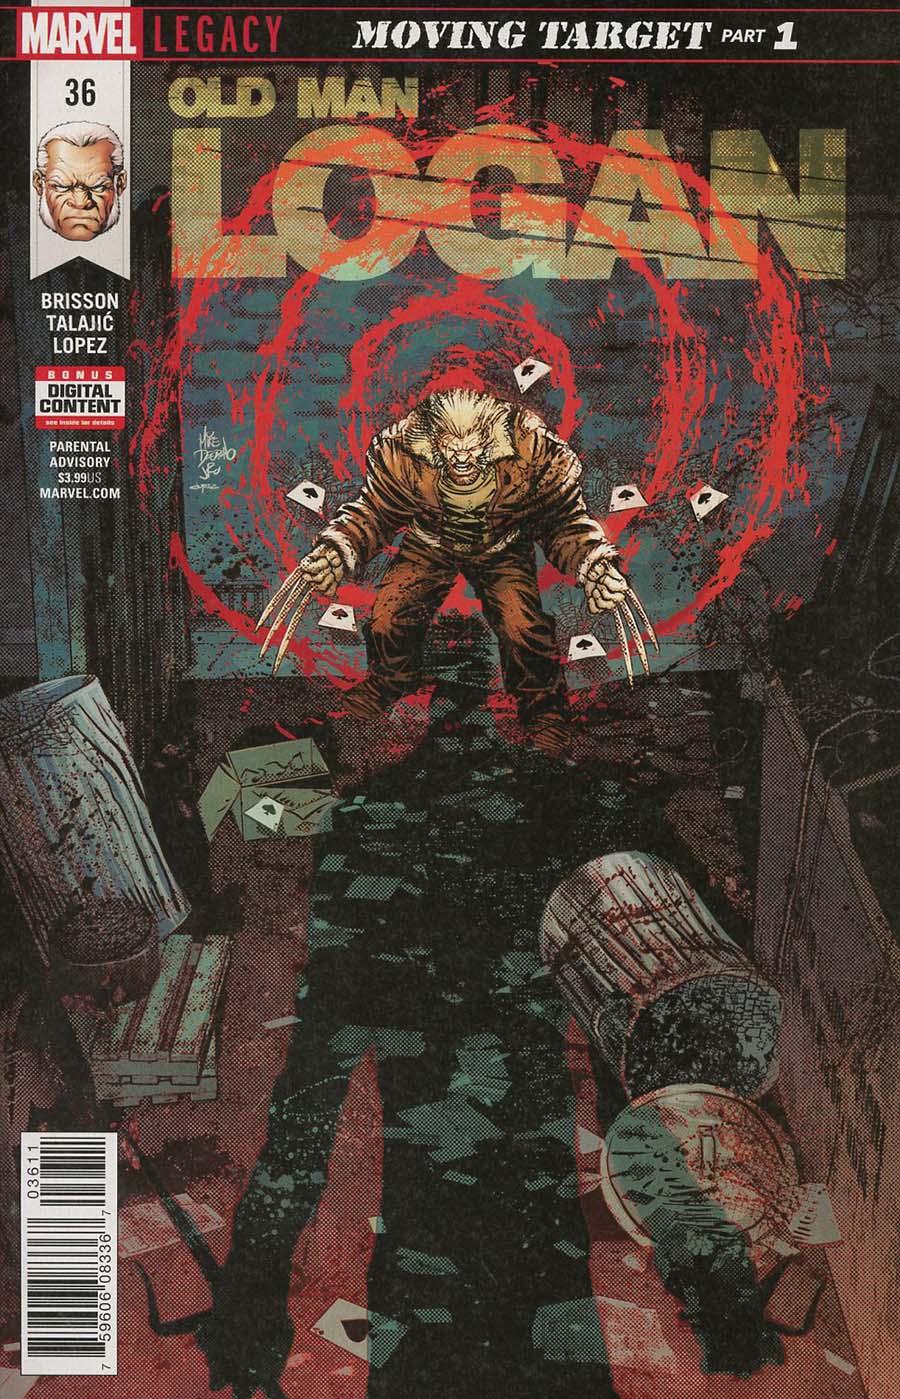 Old Man Logan Vol 2 #36 Cover A Regular Mike Deodato Jr Cover (Marvel Legacy Tie-In)